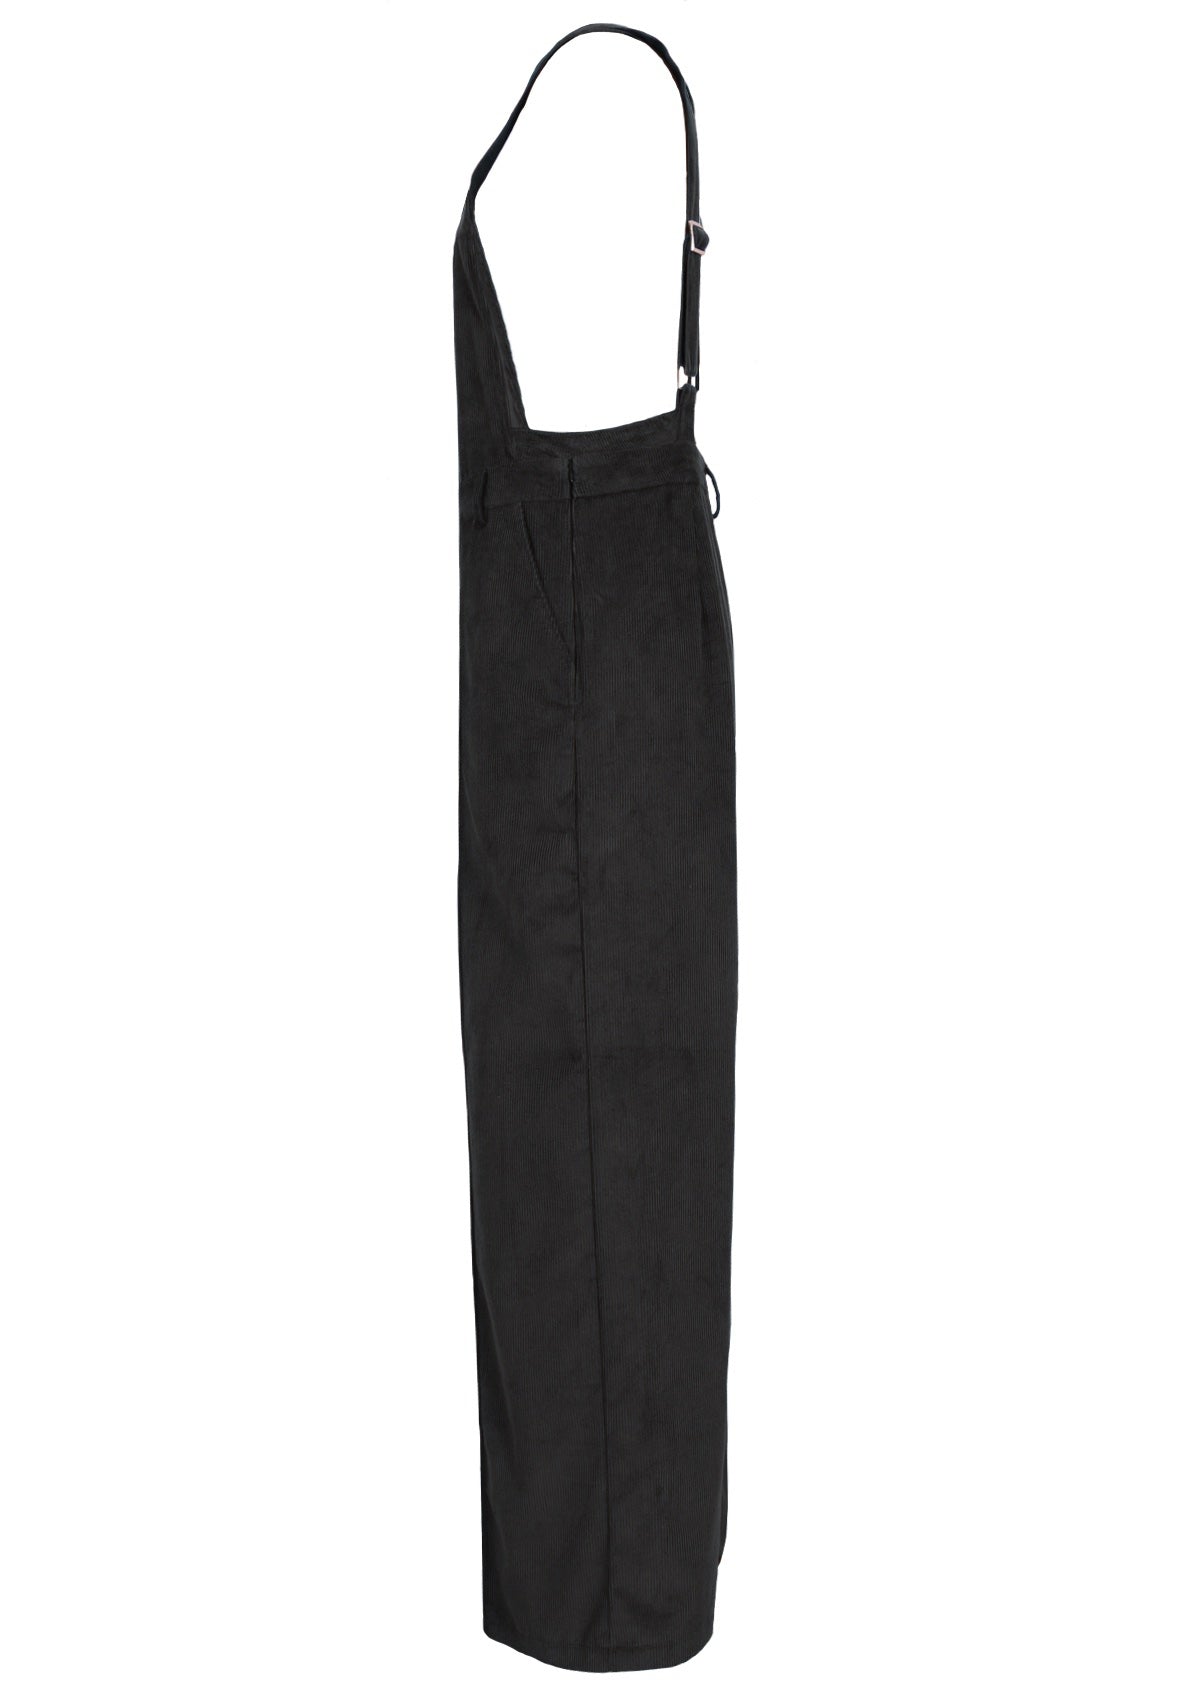 100% cotton corduroy overalls have side pockets. 